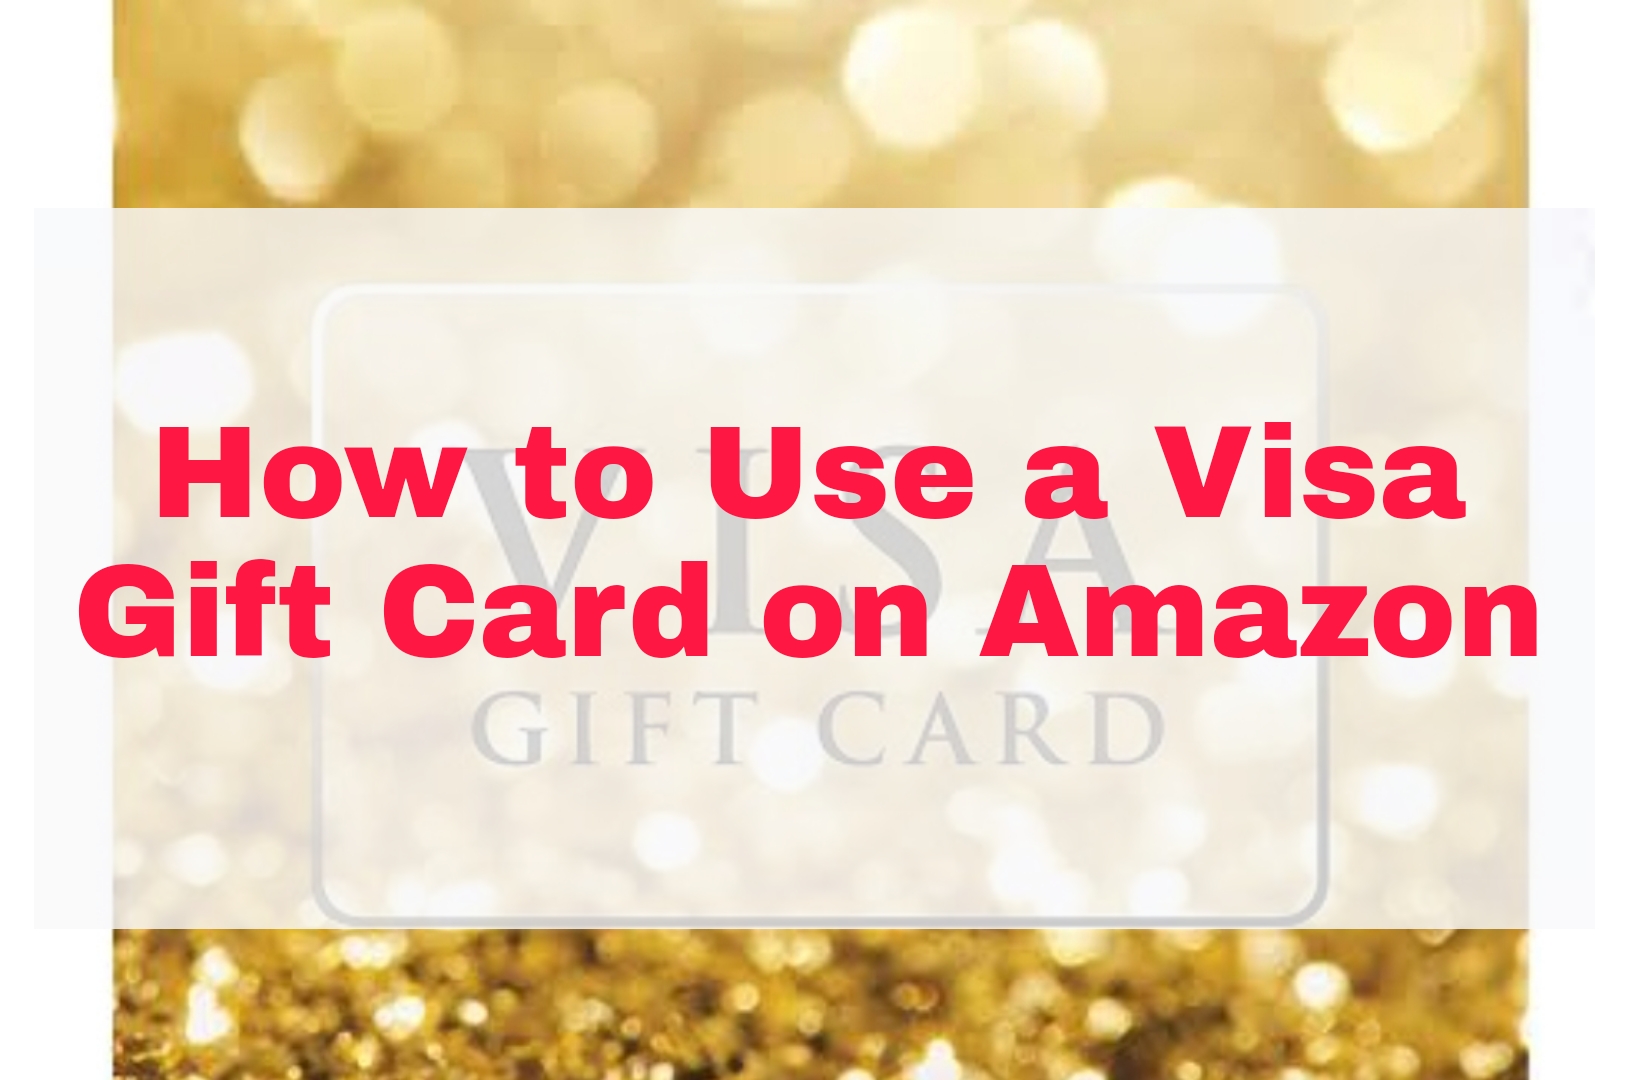 How to Use a Visa Gift Card on Amazon